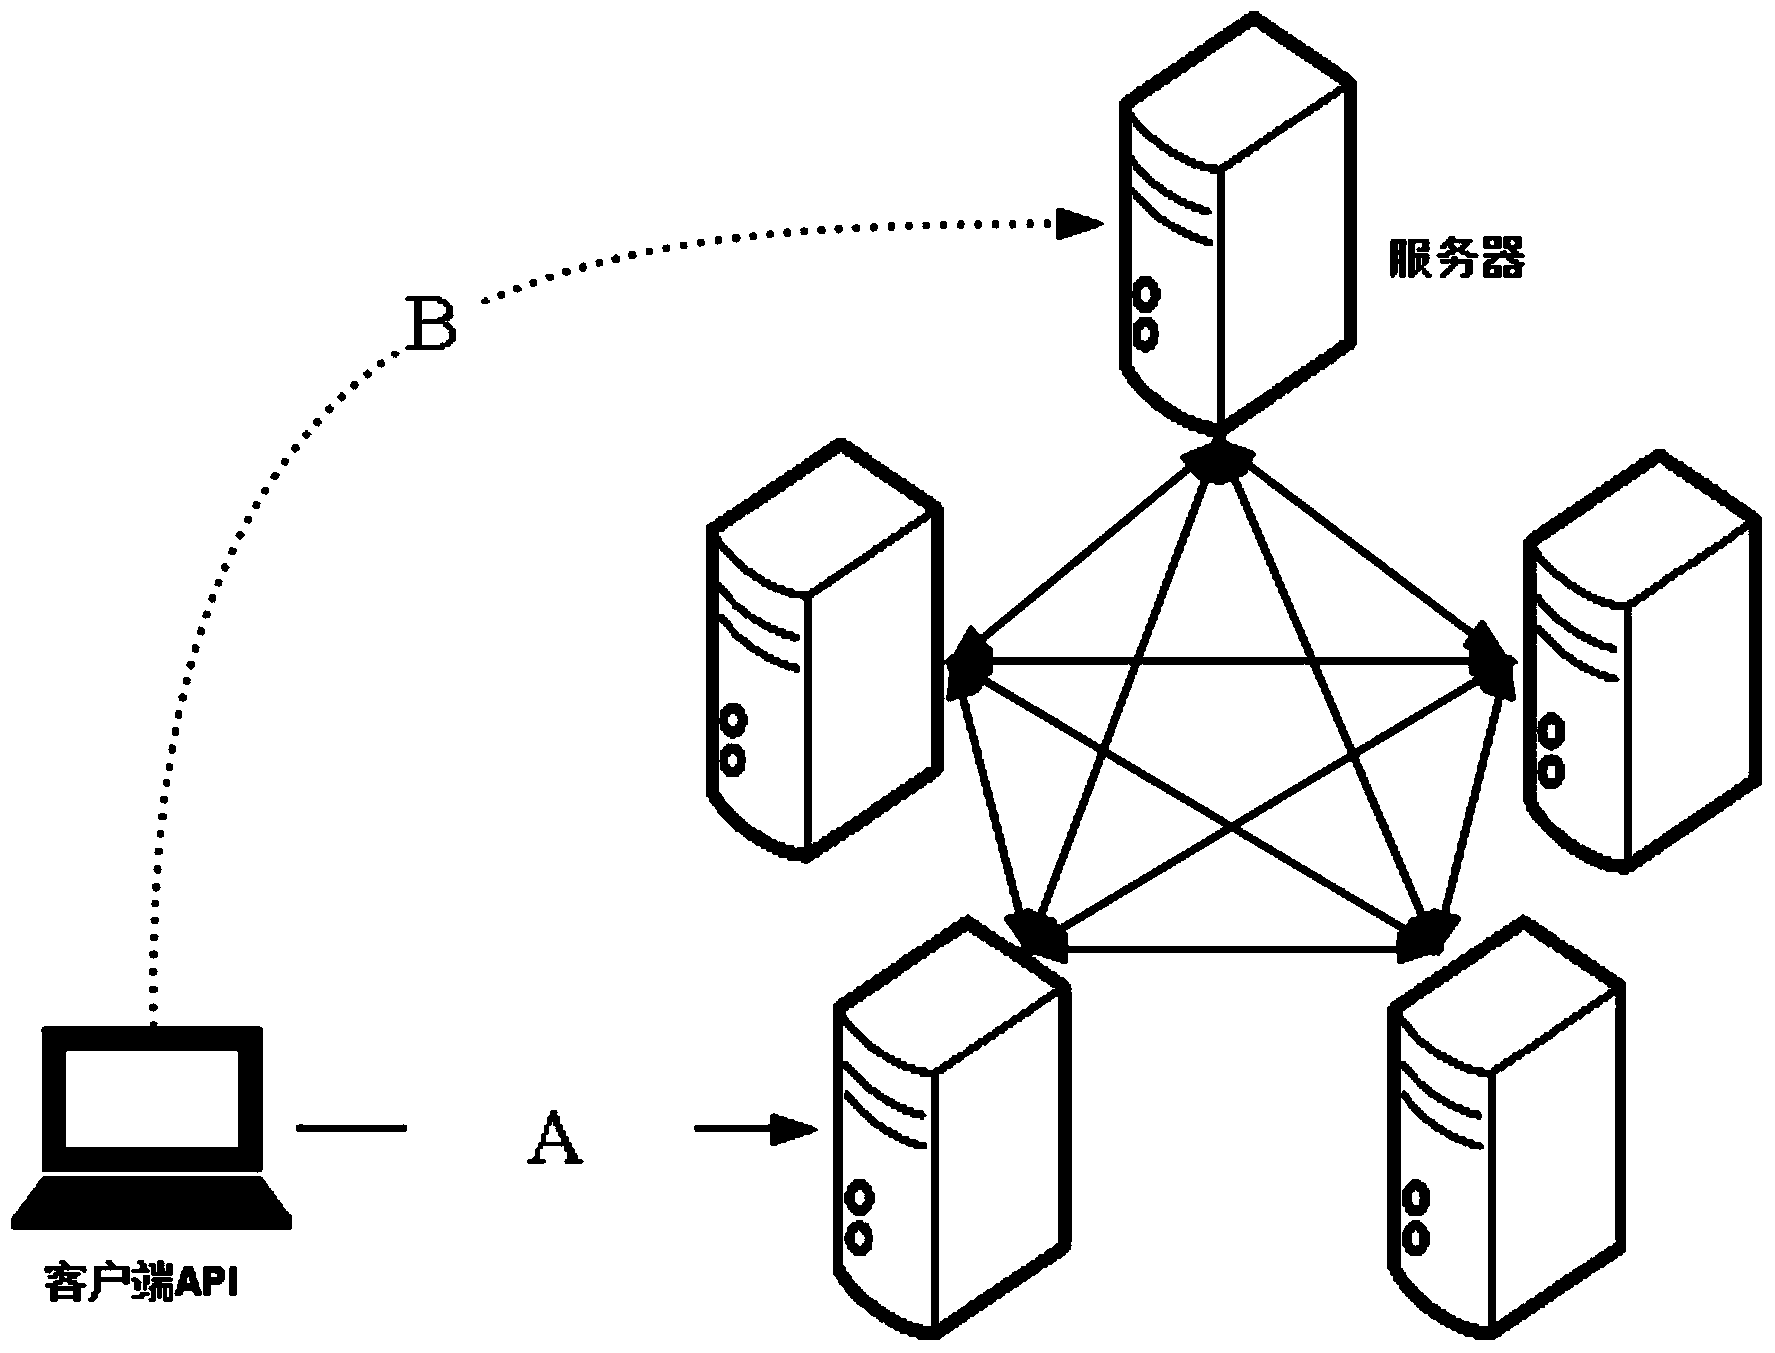 Distributed file system architectural method supporting mass data access